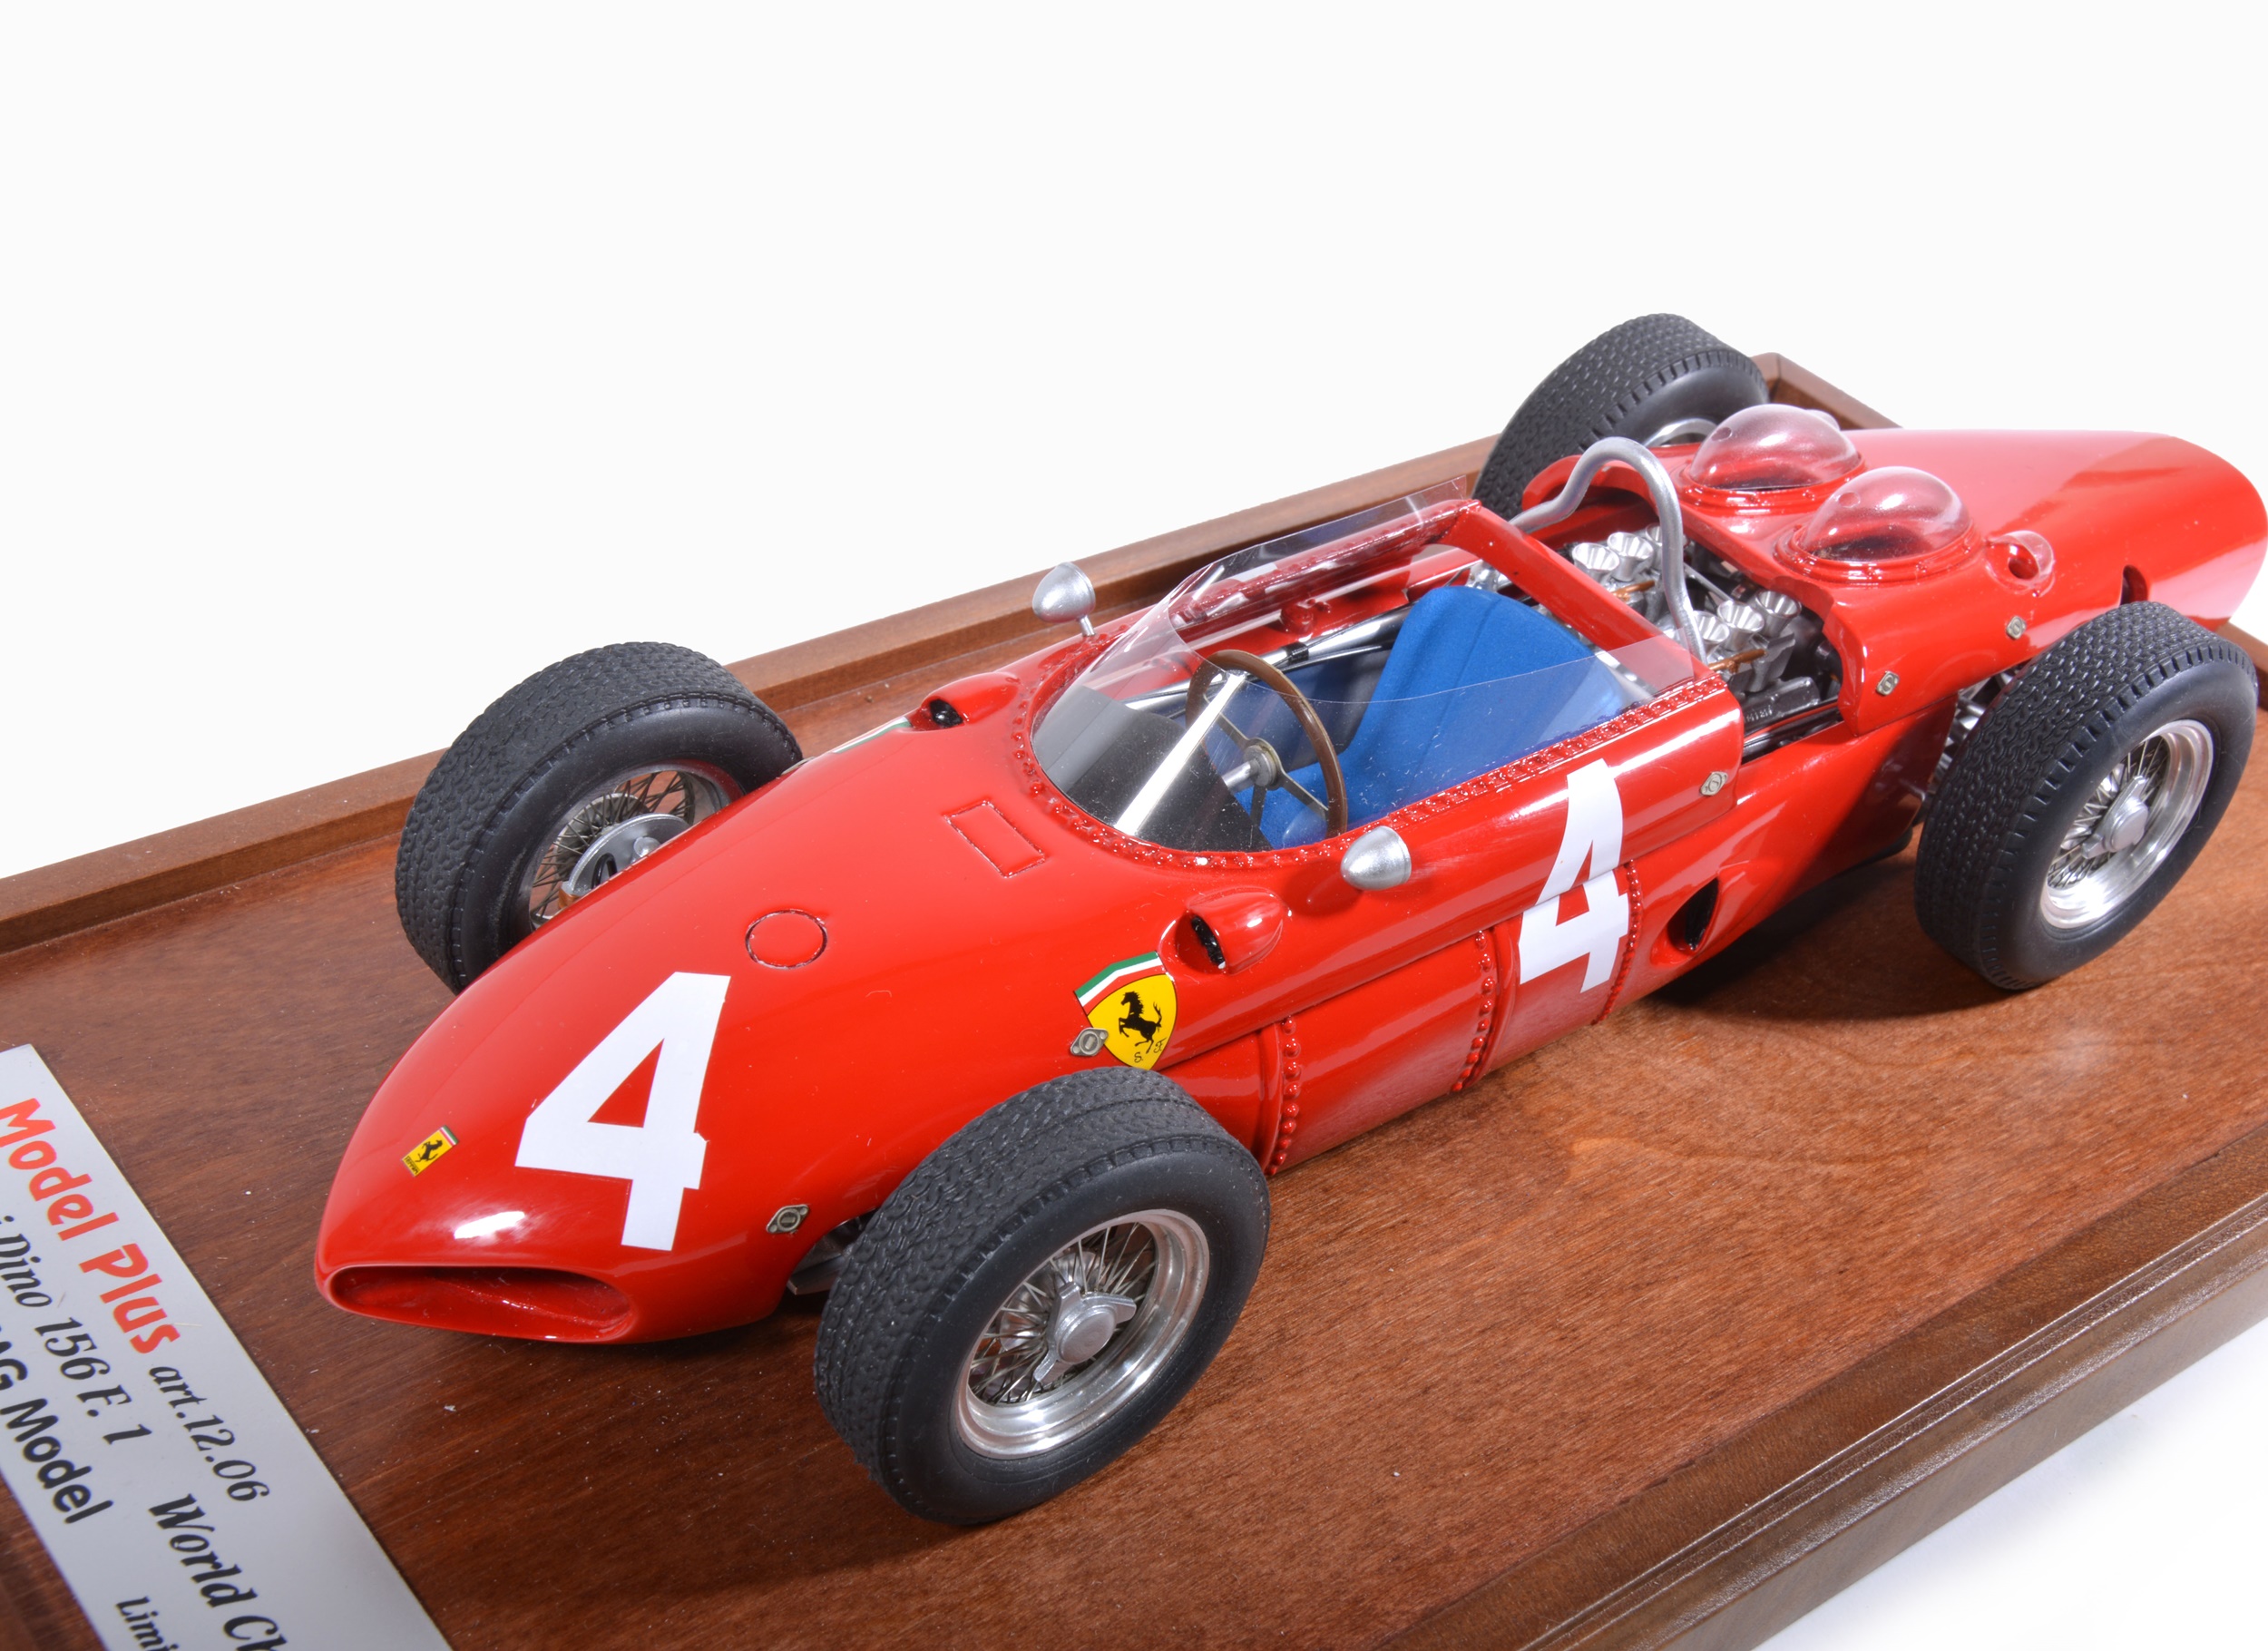 A Gentleman's Collection of Scale Model Racing Cars and Motorbikes - Results